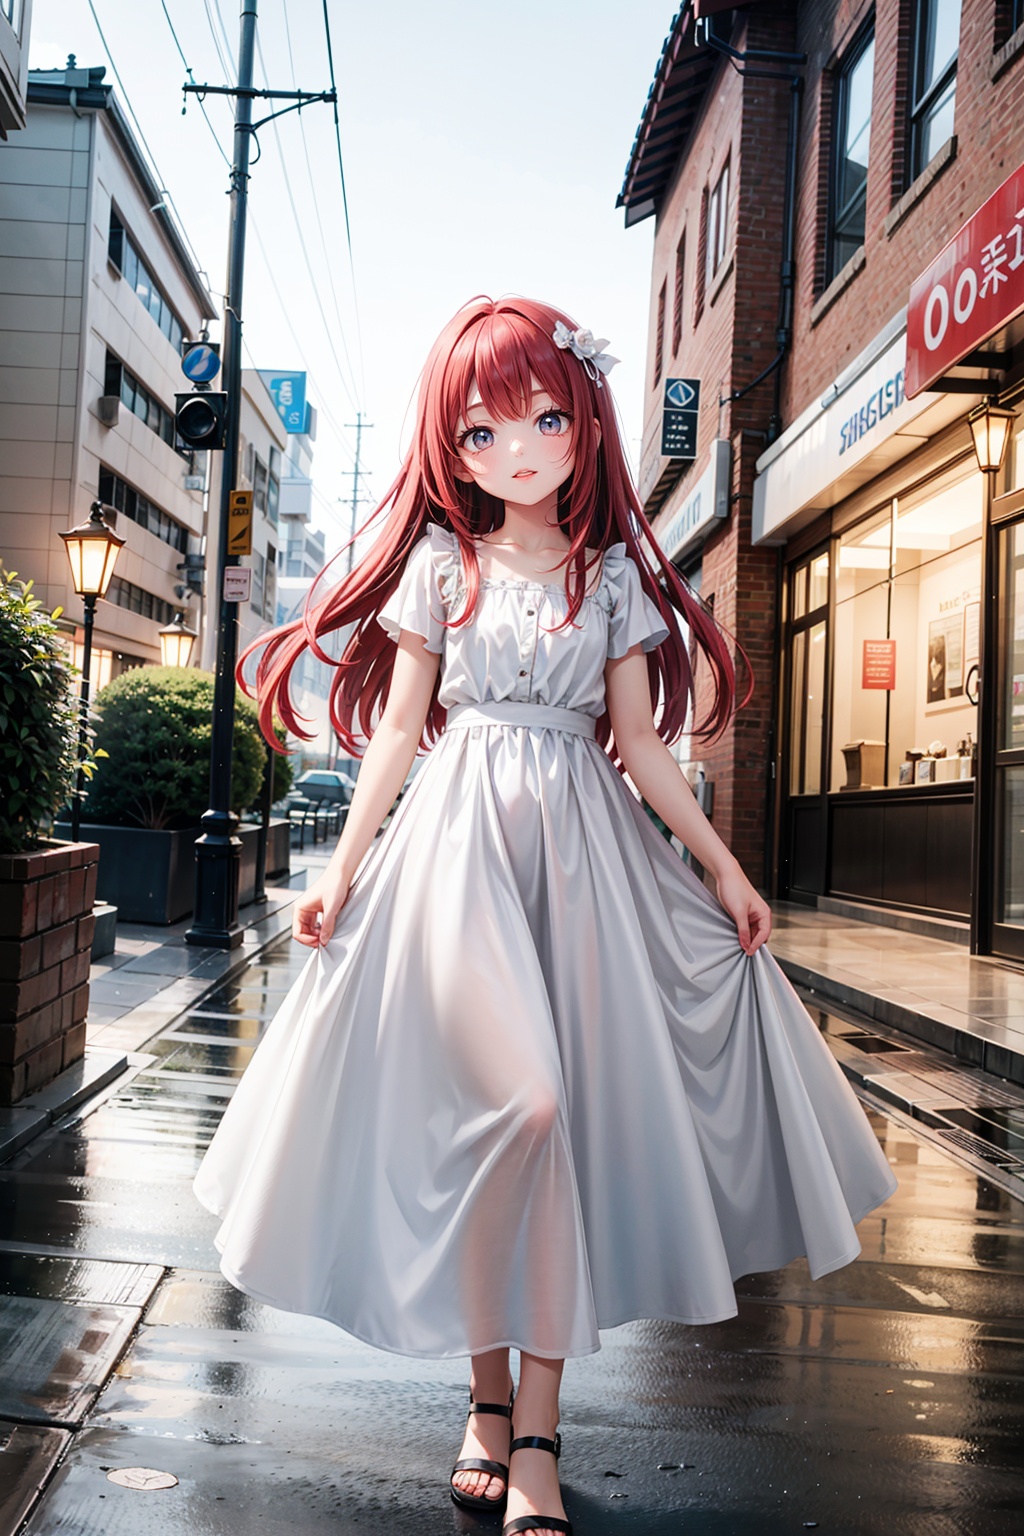 A petite, young girl with long red hair and a white dress walks on the gray street under the glow of the street lamps. As she looks up at the camera, her gaze reflects the light, creating a gentle glow that captivates the audience., Thick coating